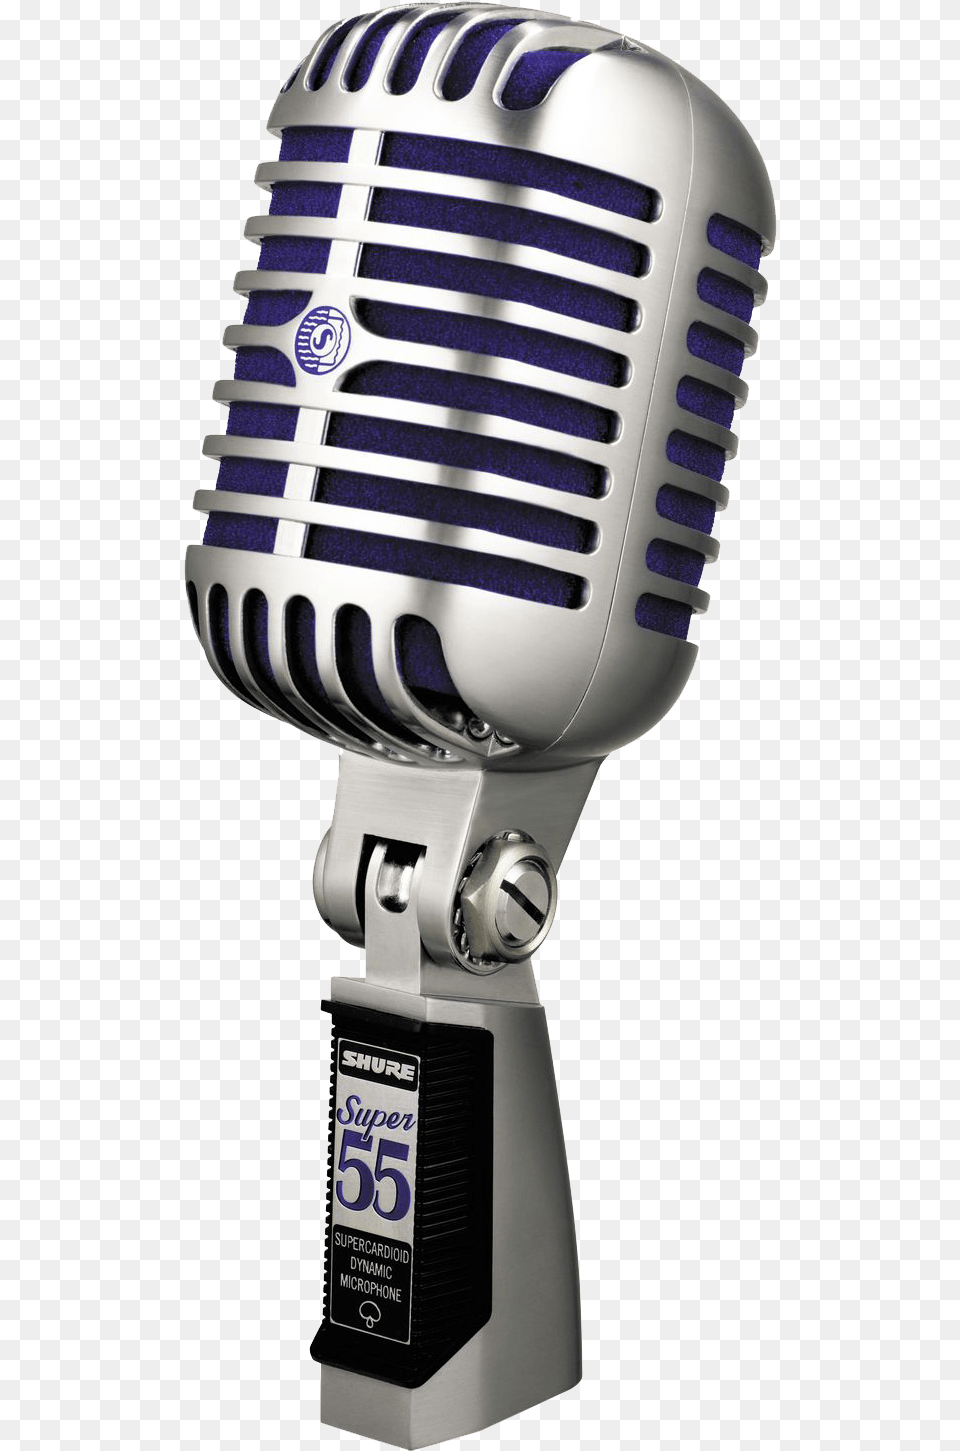 Download Mic Hq Image Freepngimg Micro Shure Super, Electrical Device, Microphone, Person Png